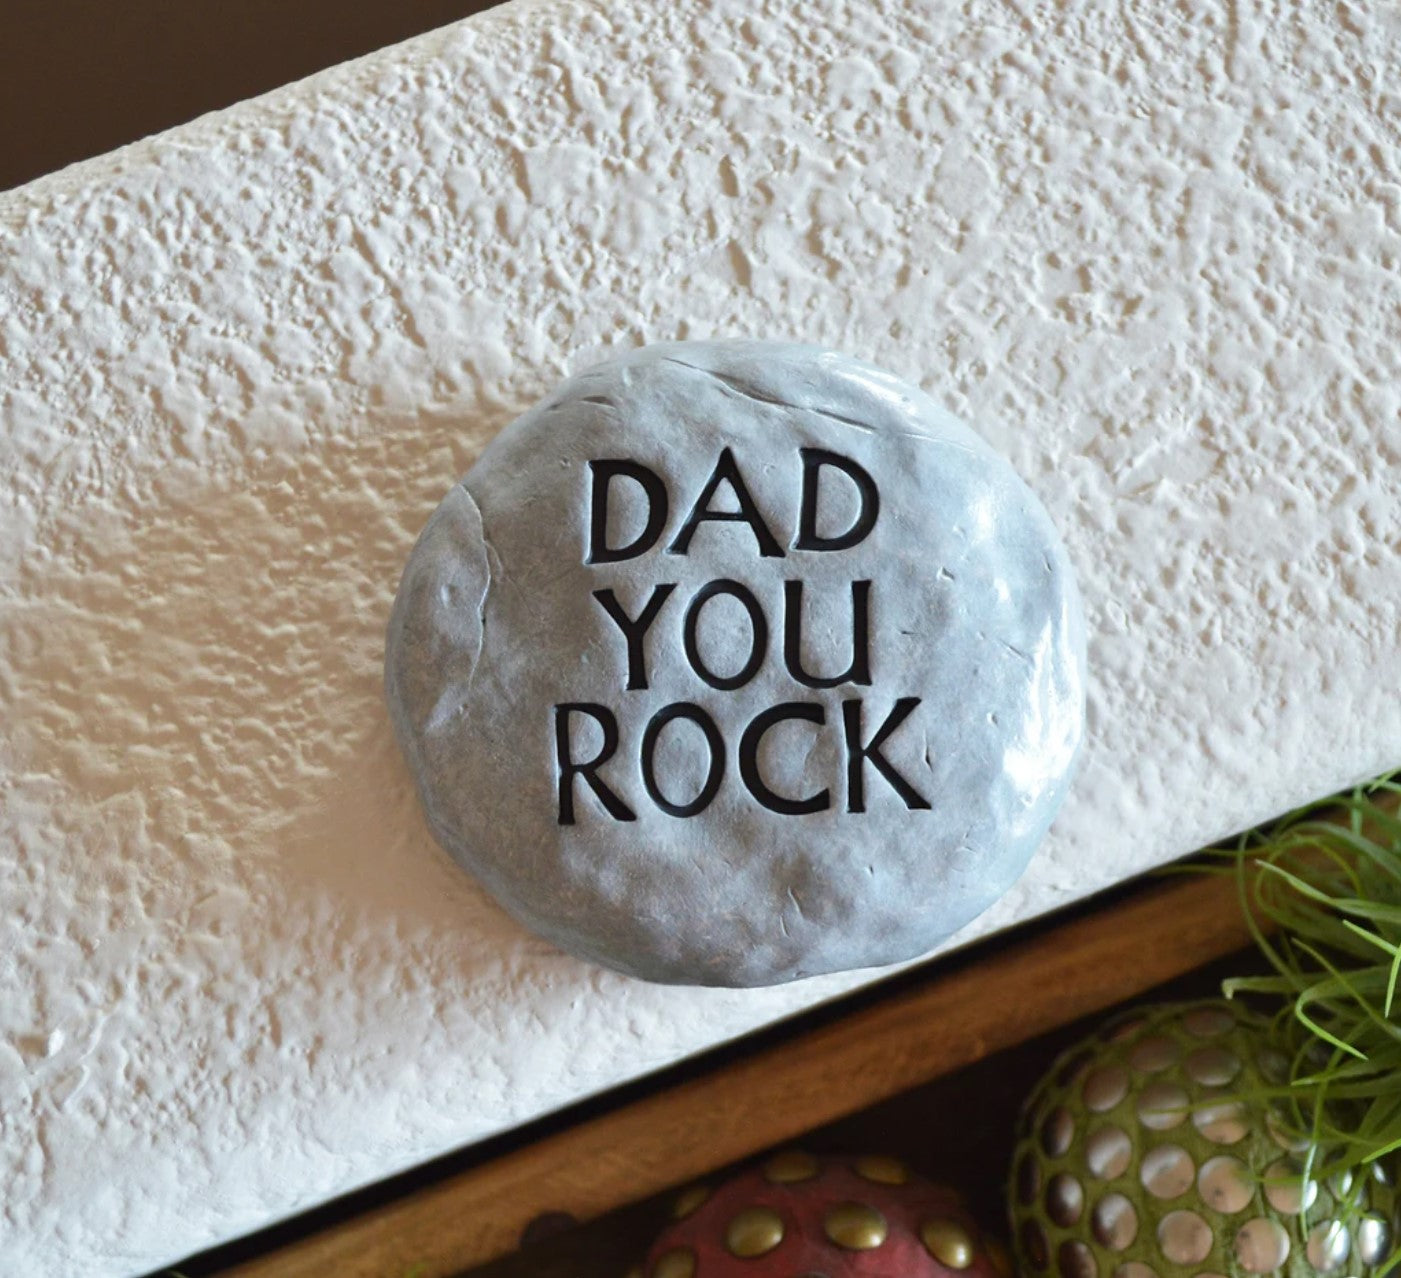 Gift for dad / funny dad gifts / Birthday gift for dad / dad you rock stone / paperweight desk decor / goofy dad humor / READY TO SHIP